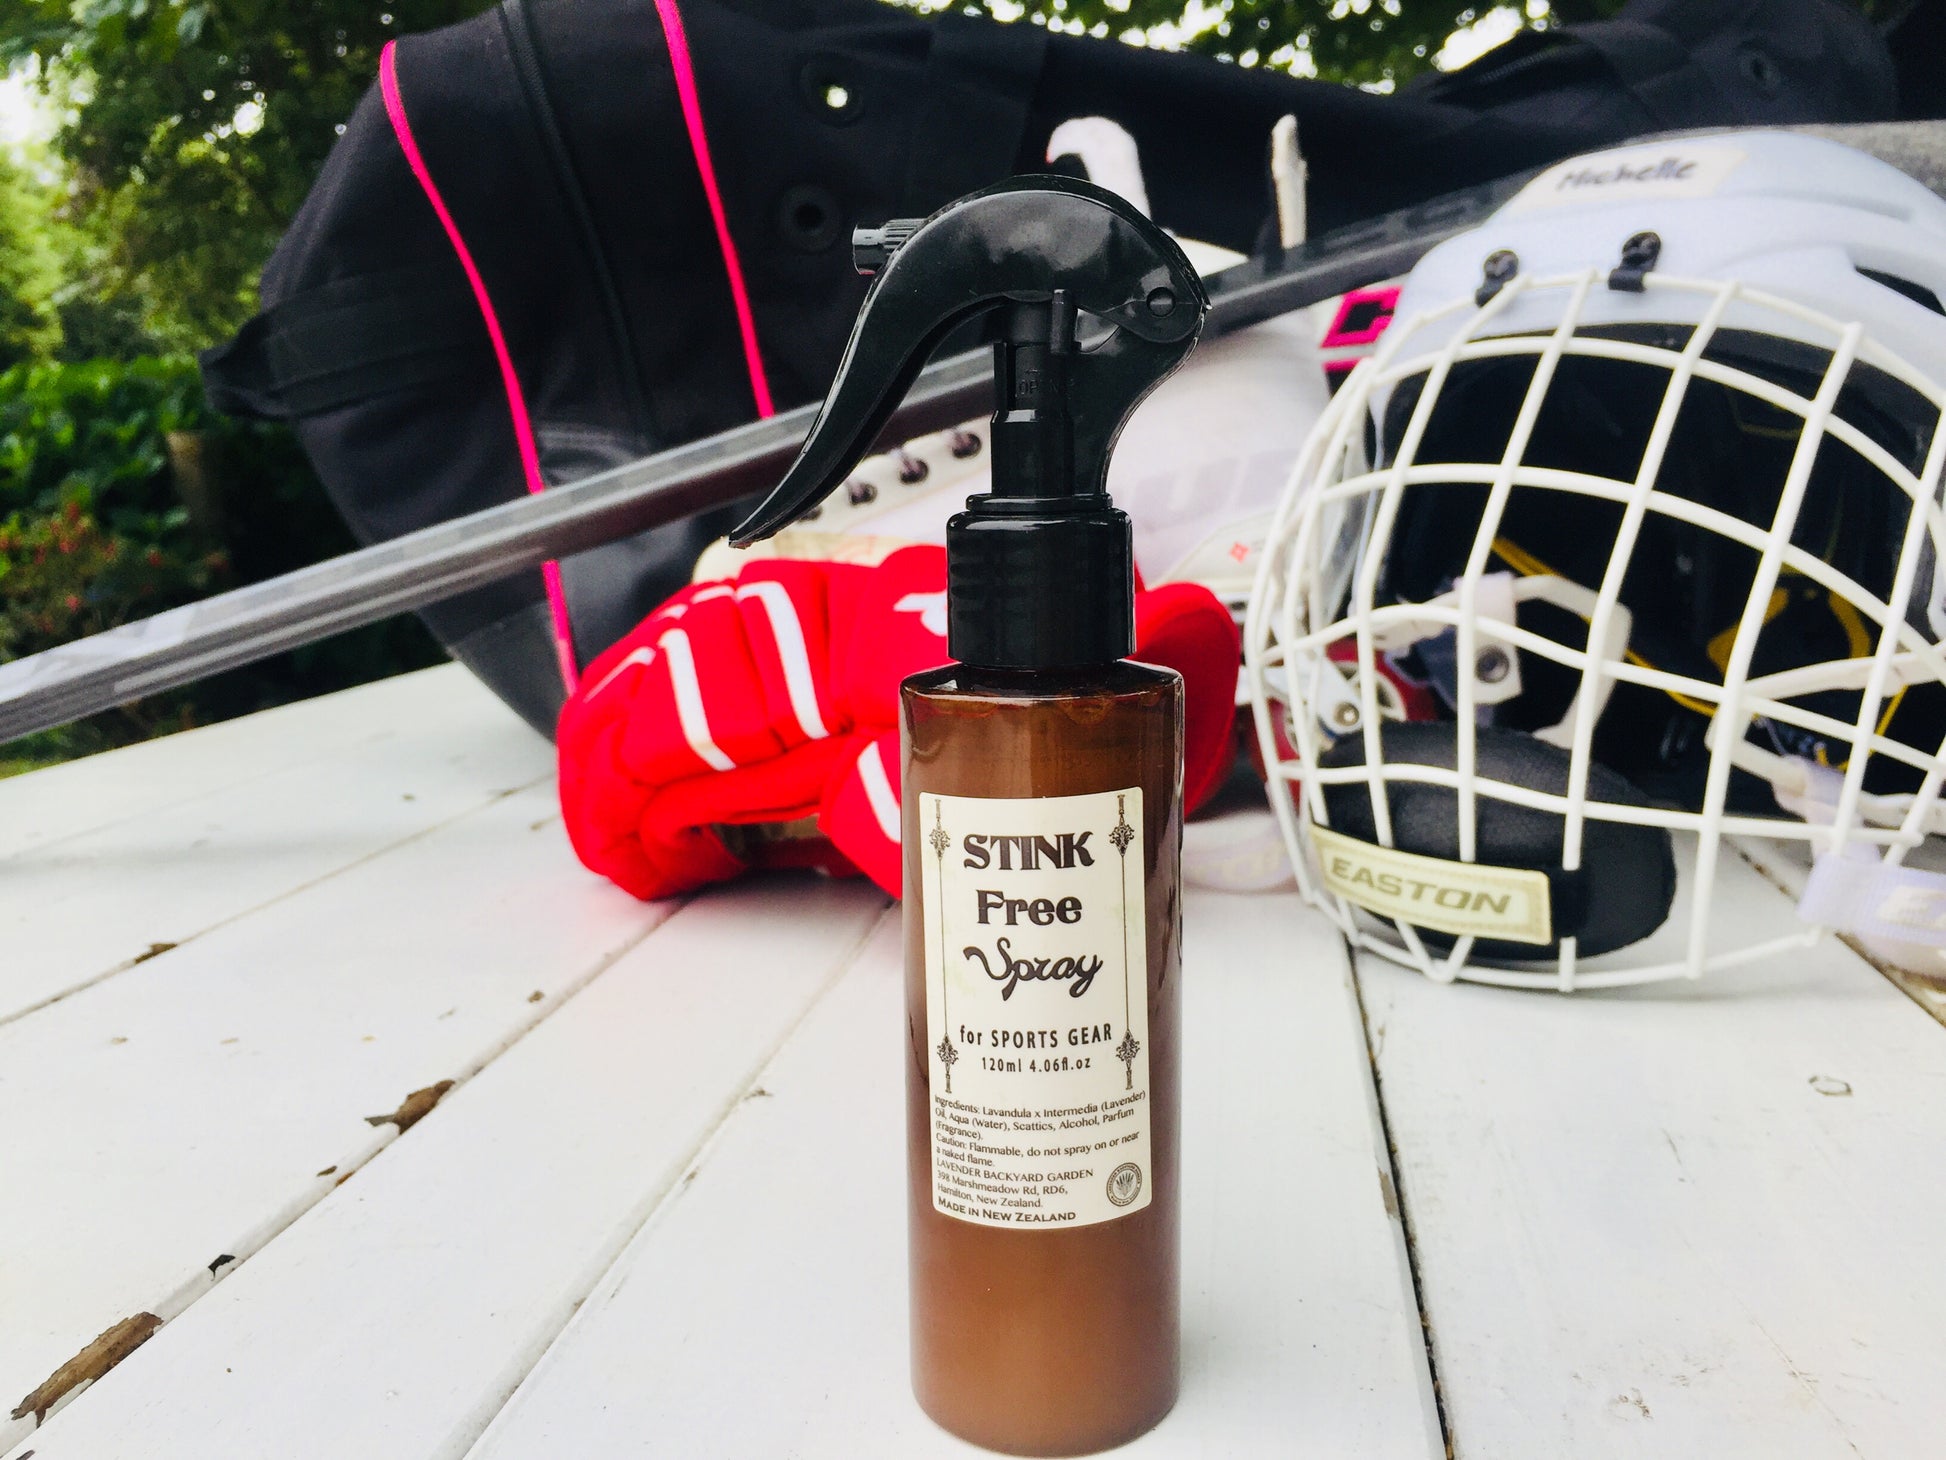 NZ Lavender Products Stink Free Spray scented by essential oils for Sports Gear